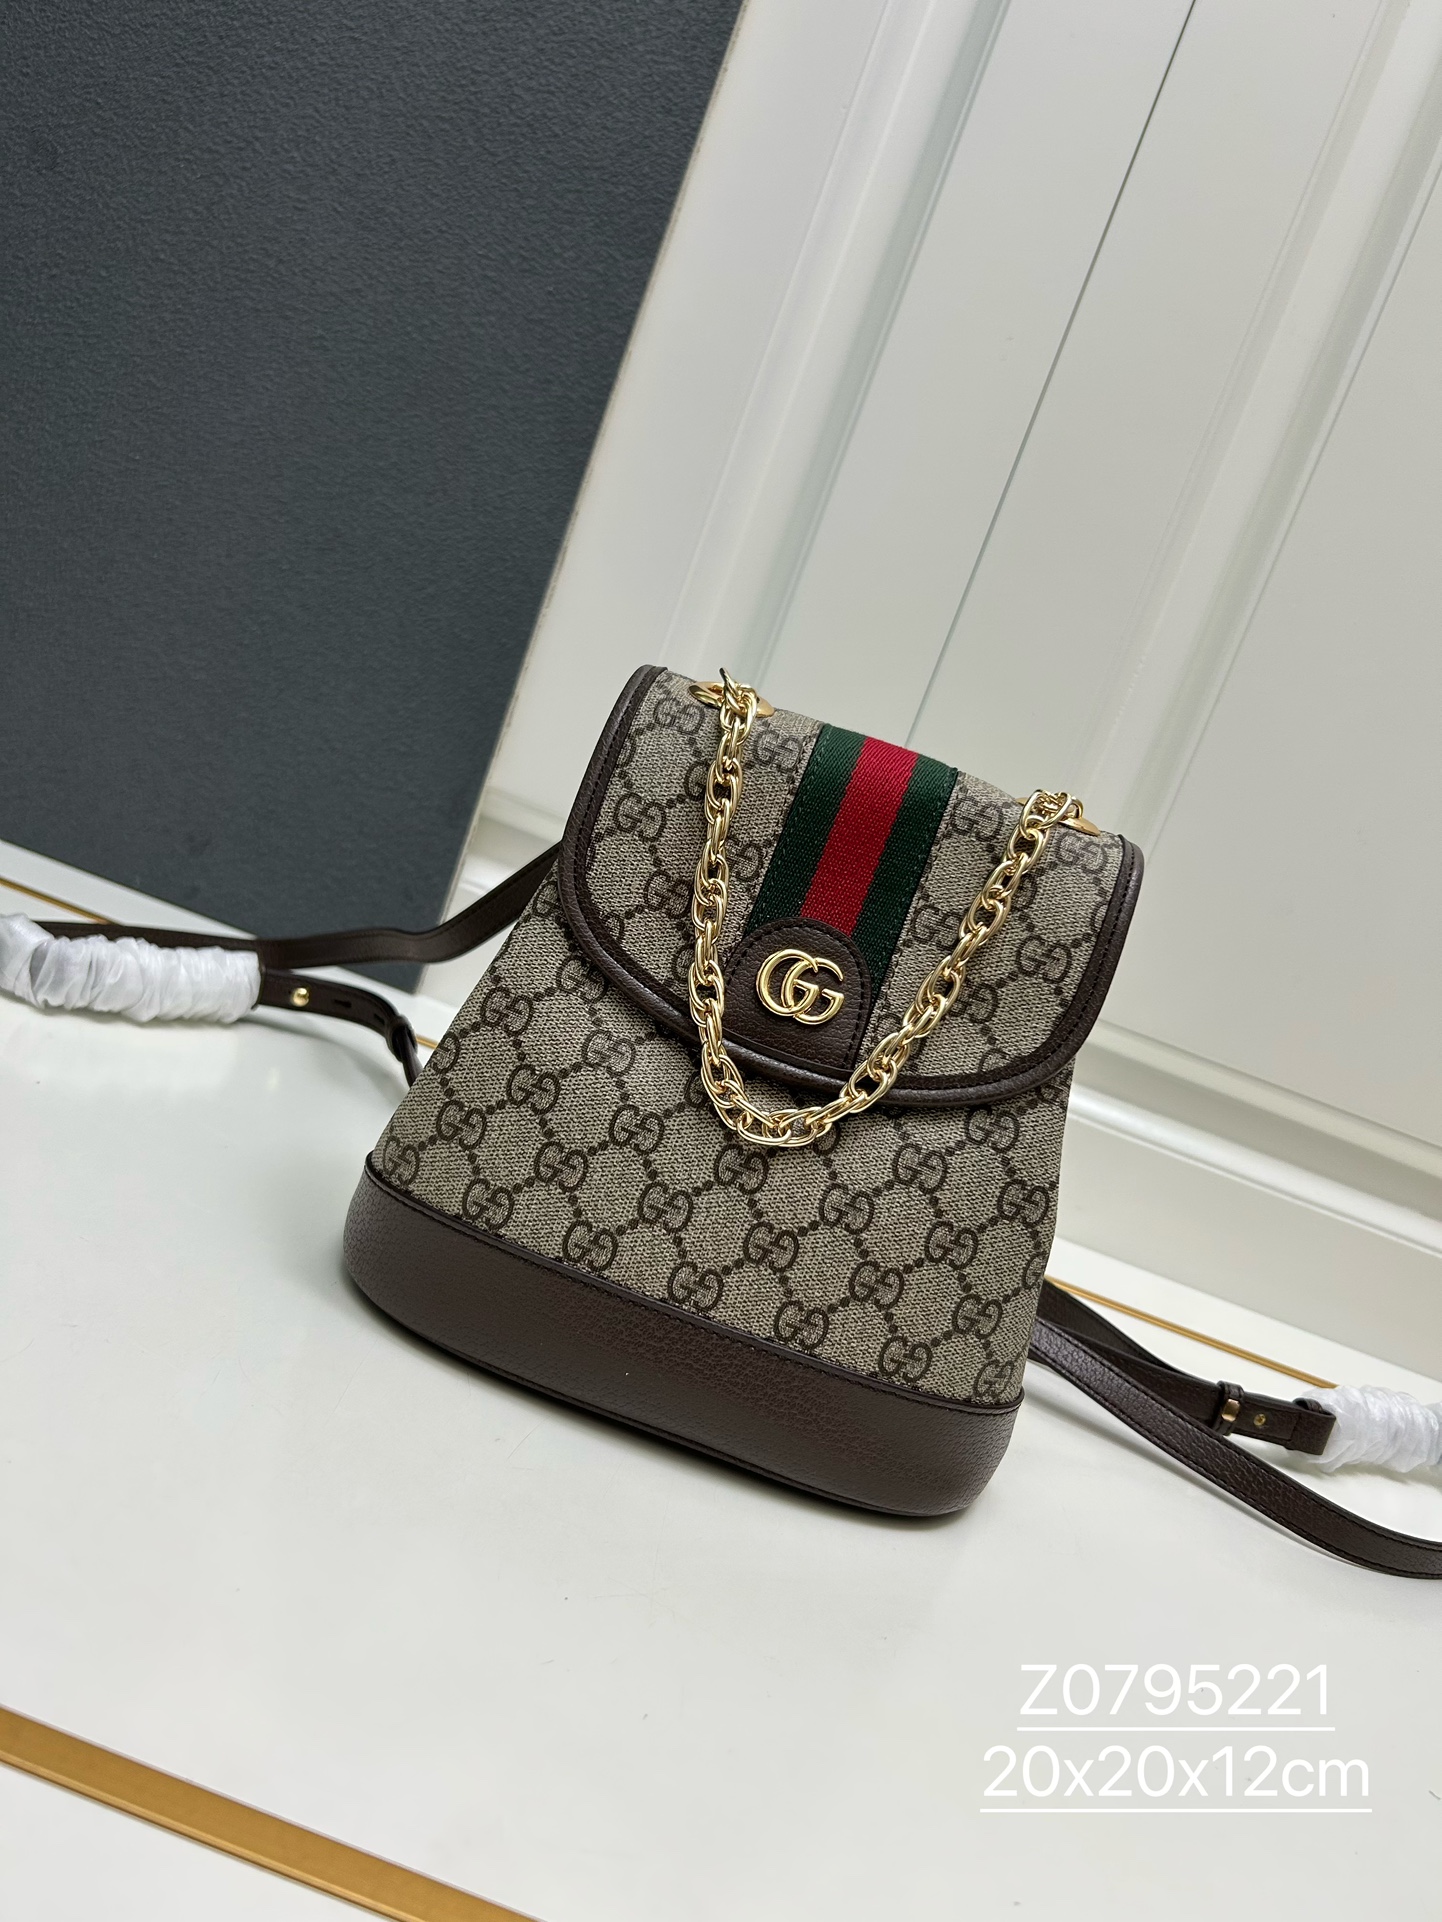 Gucci GG Supreme Bags Backpack Beige Brown Gold Green Red White Canvas Cotton PVC Mini Z0795221